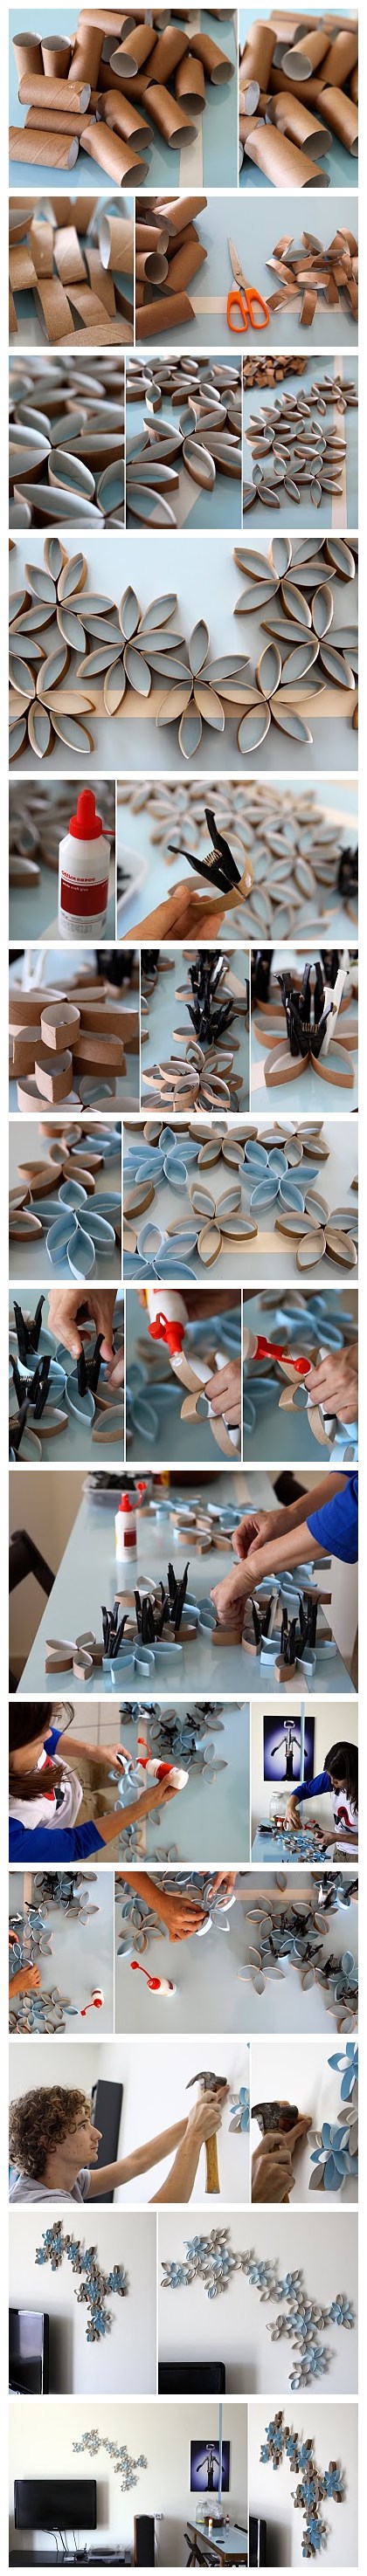 How to DIY toilet paper roll wall art project 2